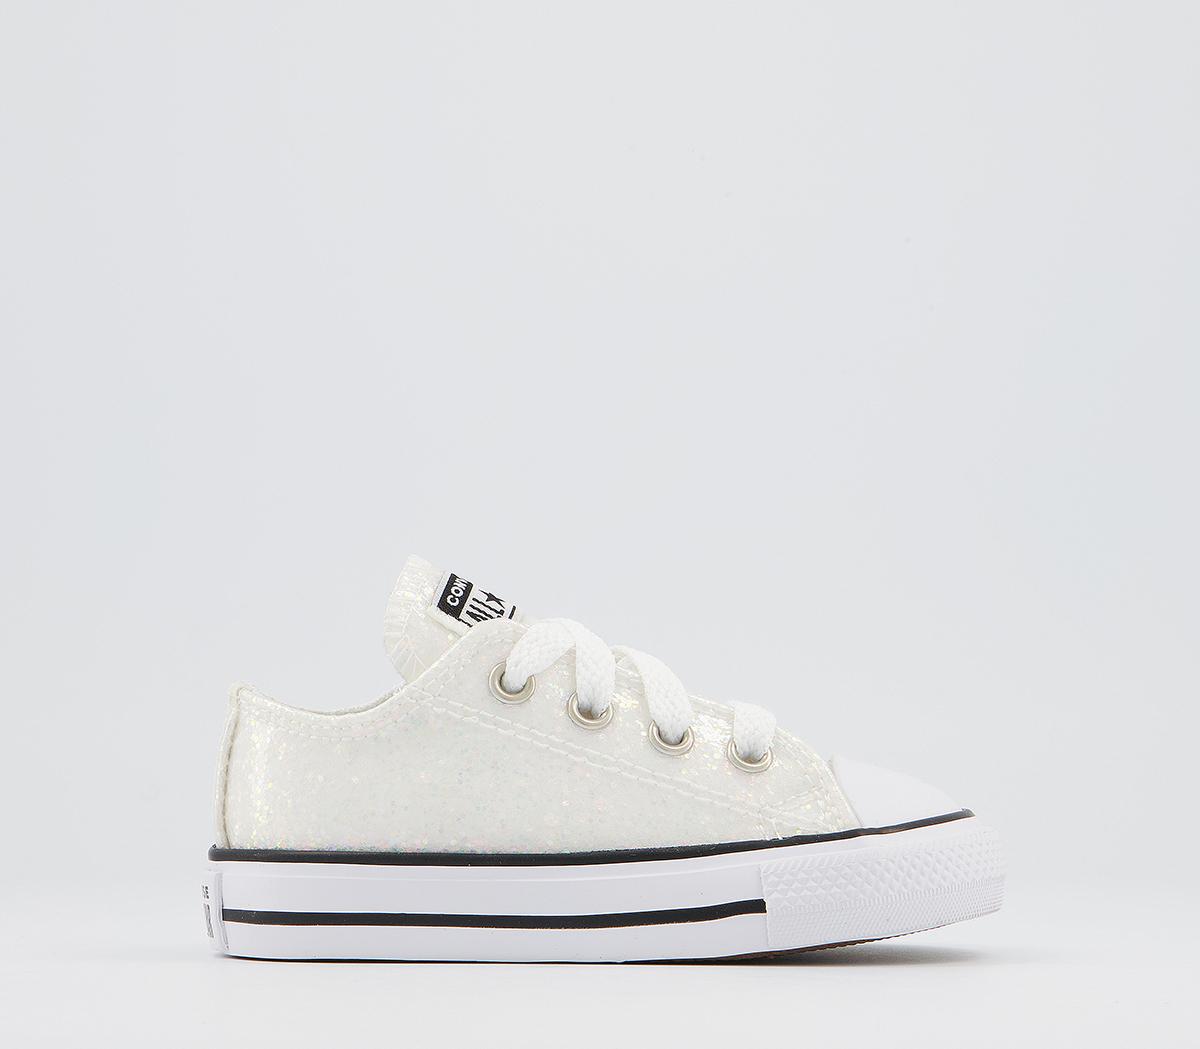 ConverseAll Star Low Infant TrainersWhite Black Glitter Exclusive